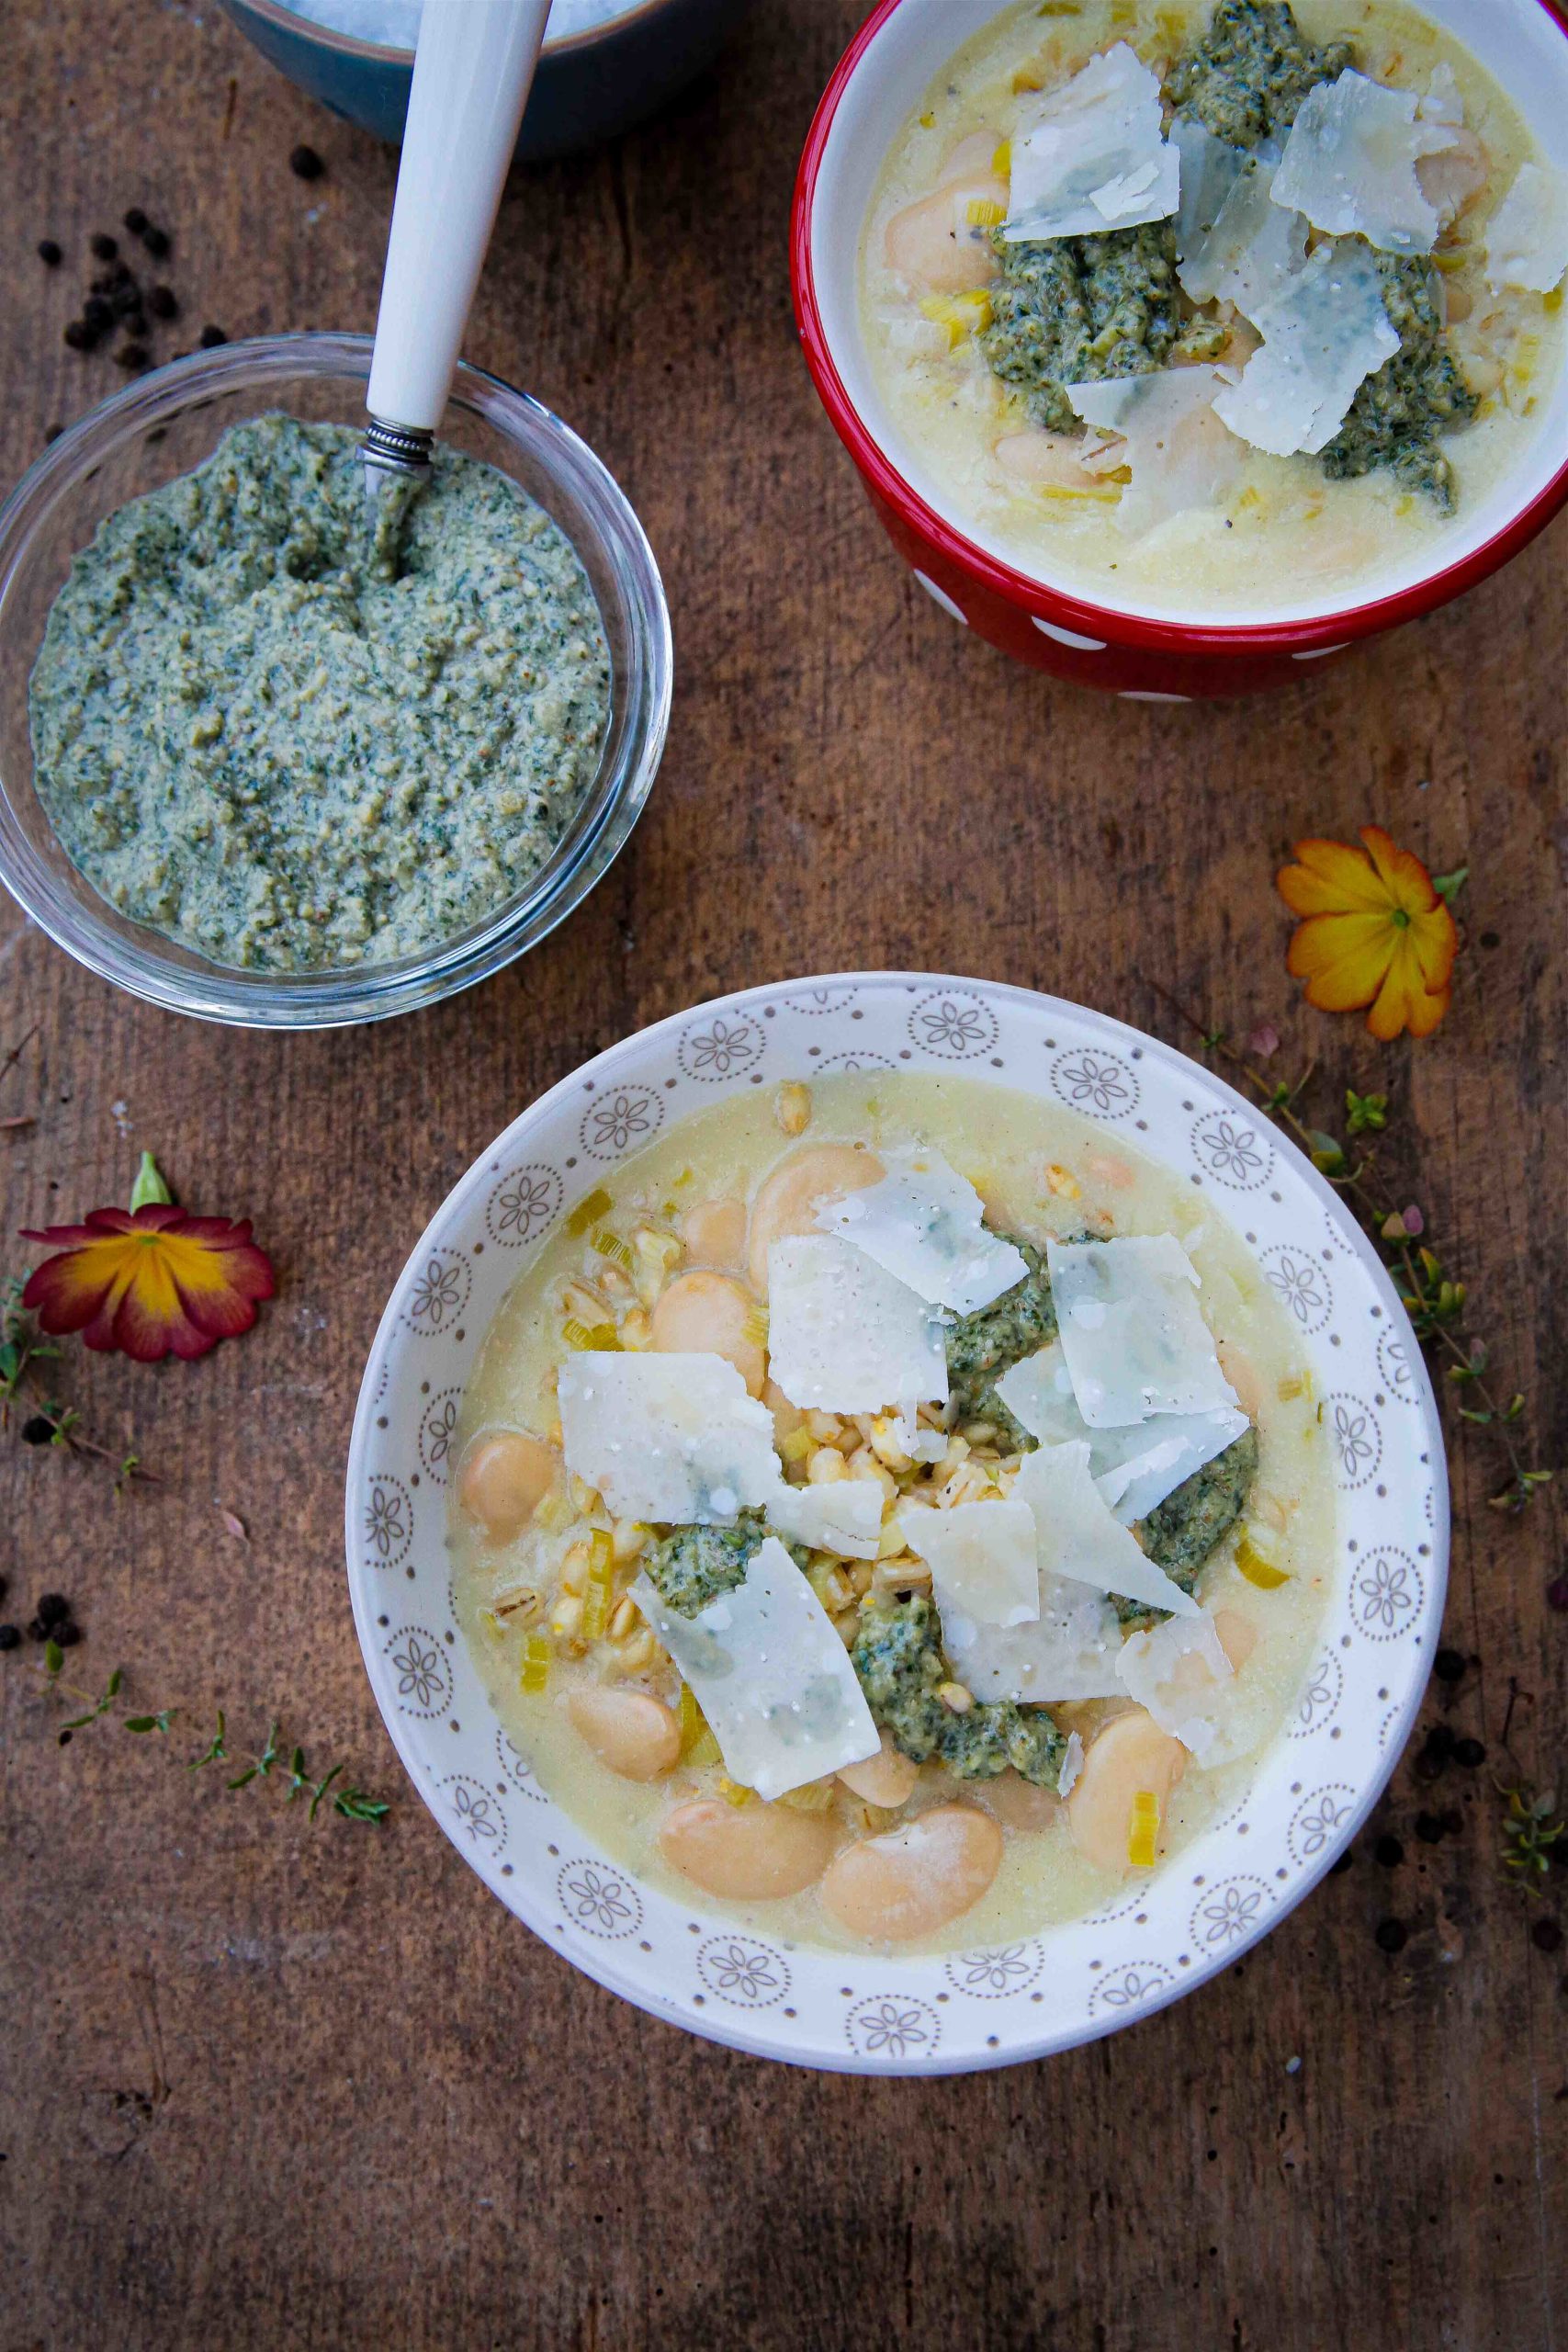 This rich and creamy white bean soup with leeks, pearl barley and pesto is so easy to make - just one pan needed - and full of hearty delicious flavours! Recipe on thecookandhim.com #vegansoup #whitebeansoup #vegansouprecipe